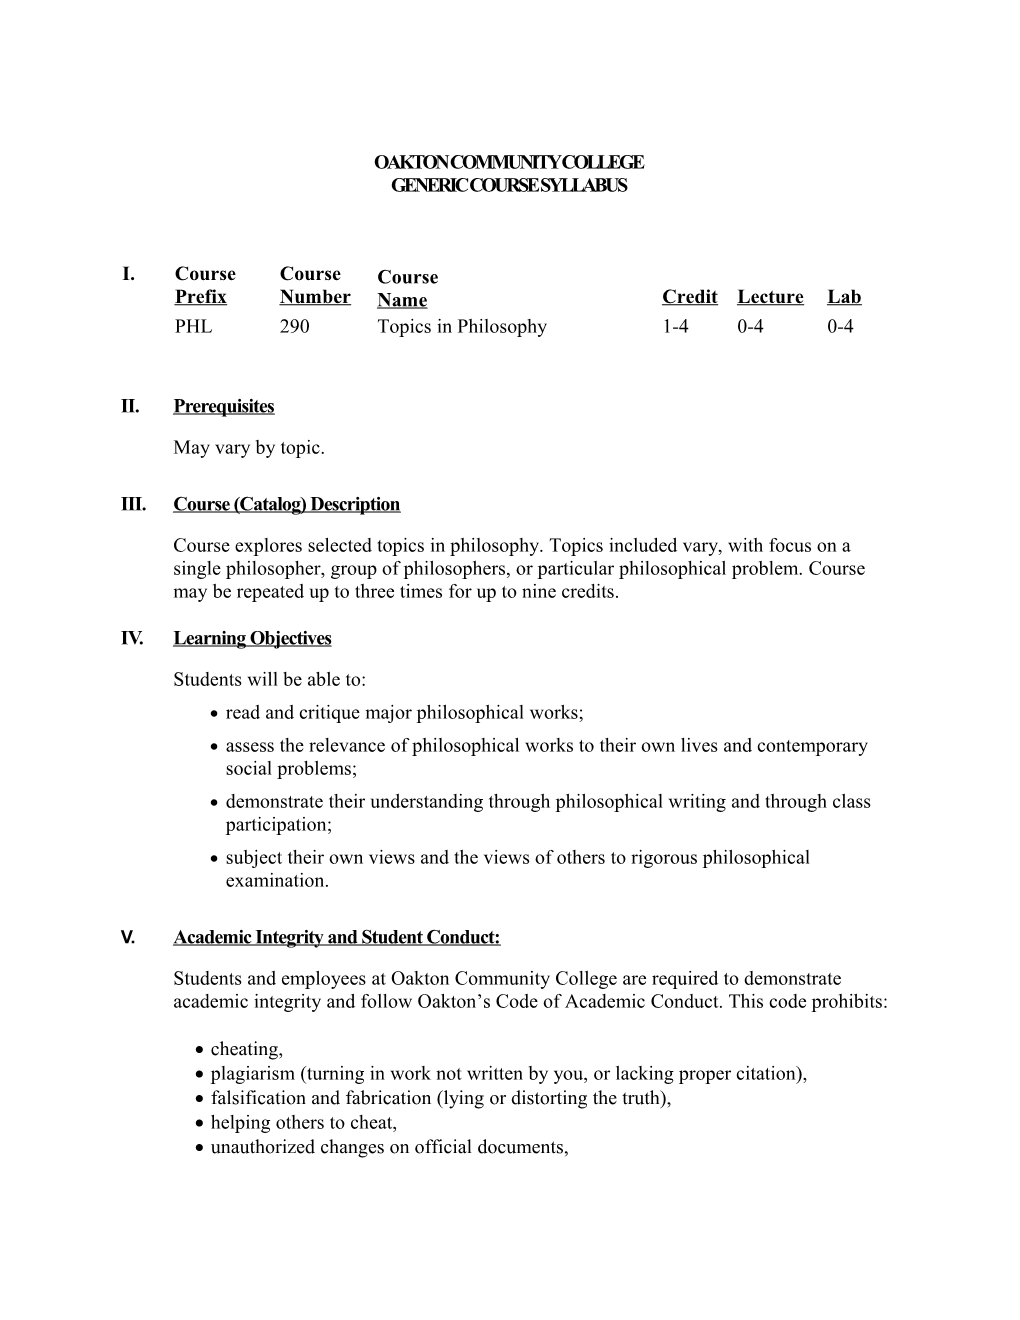 COURSE SYLLABUS (GENERIC) Page 3